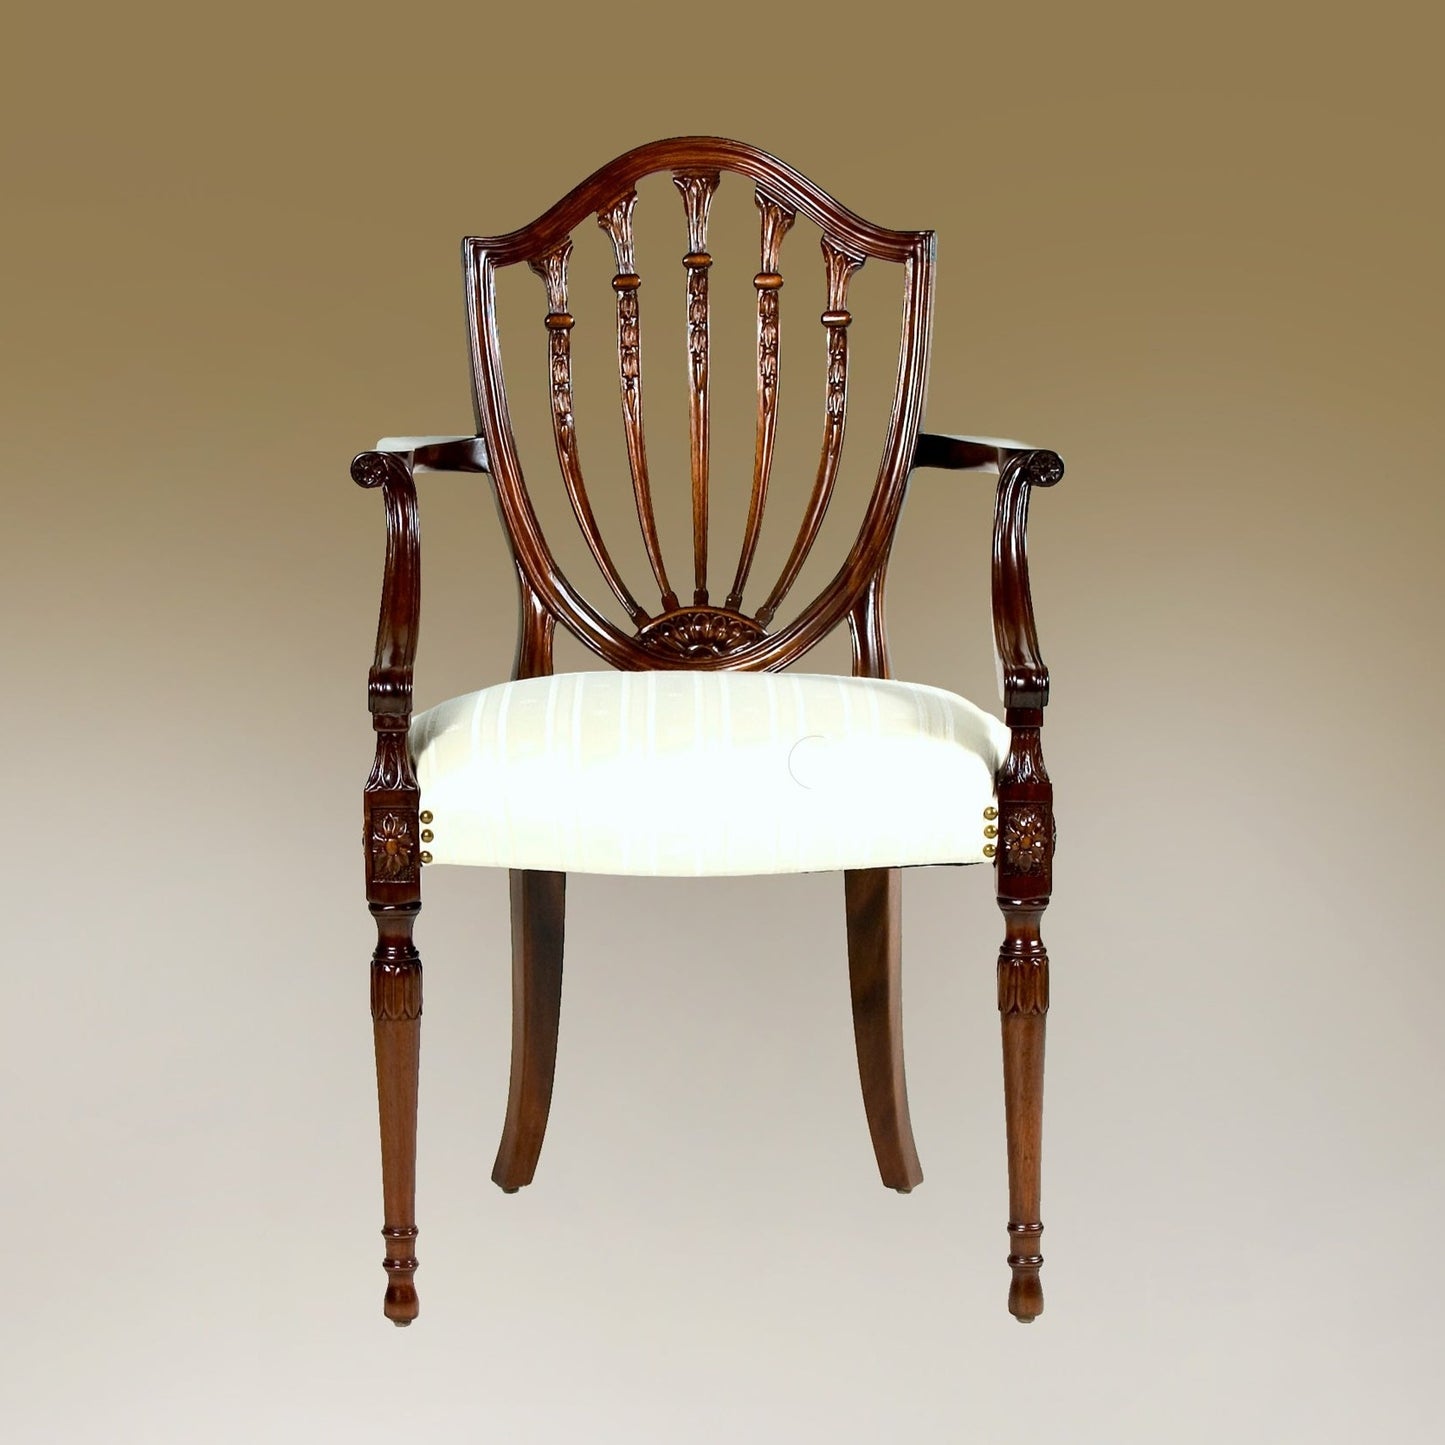 PRINCE OF WALES ARM CHAIR